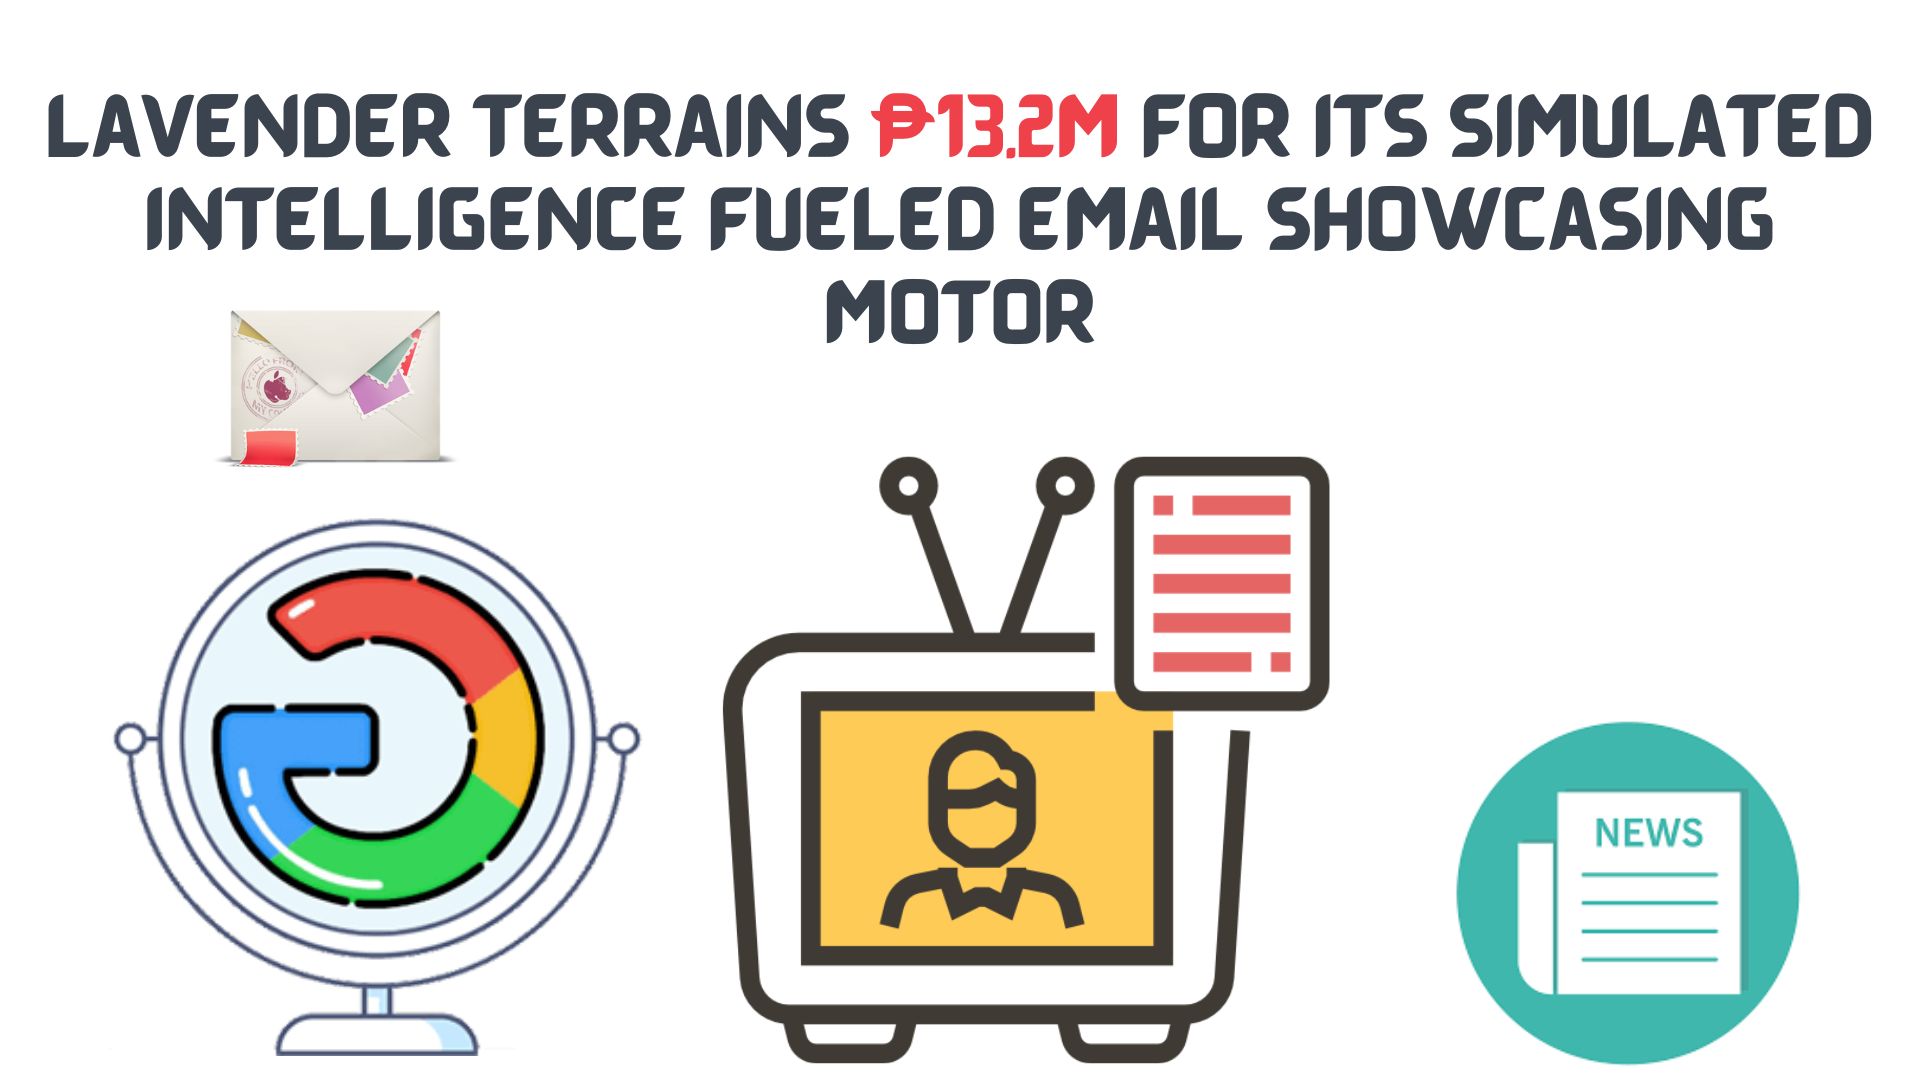 Lavender terrains $13. 2m for its simulated intelligence fueled email showcasing motor